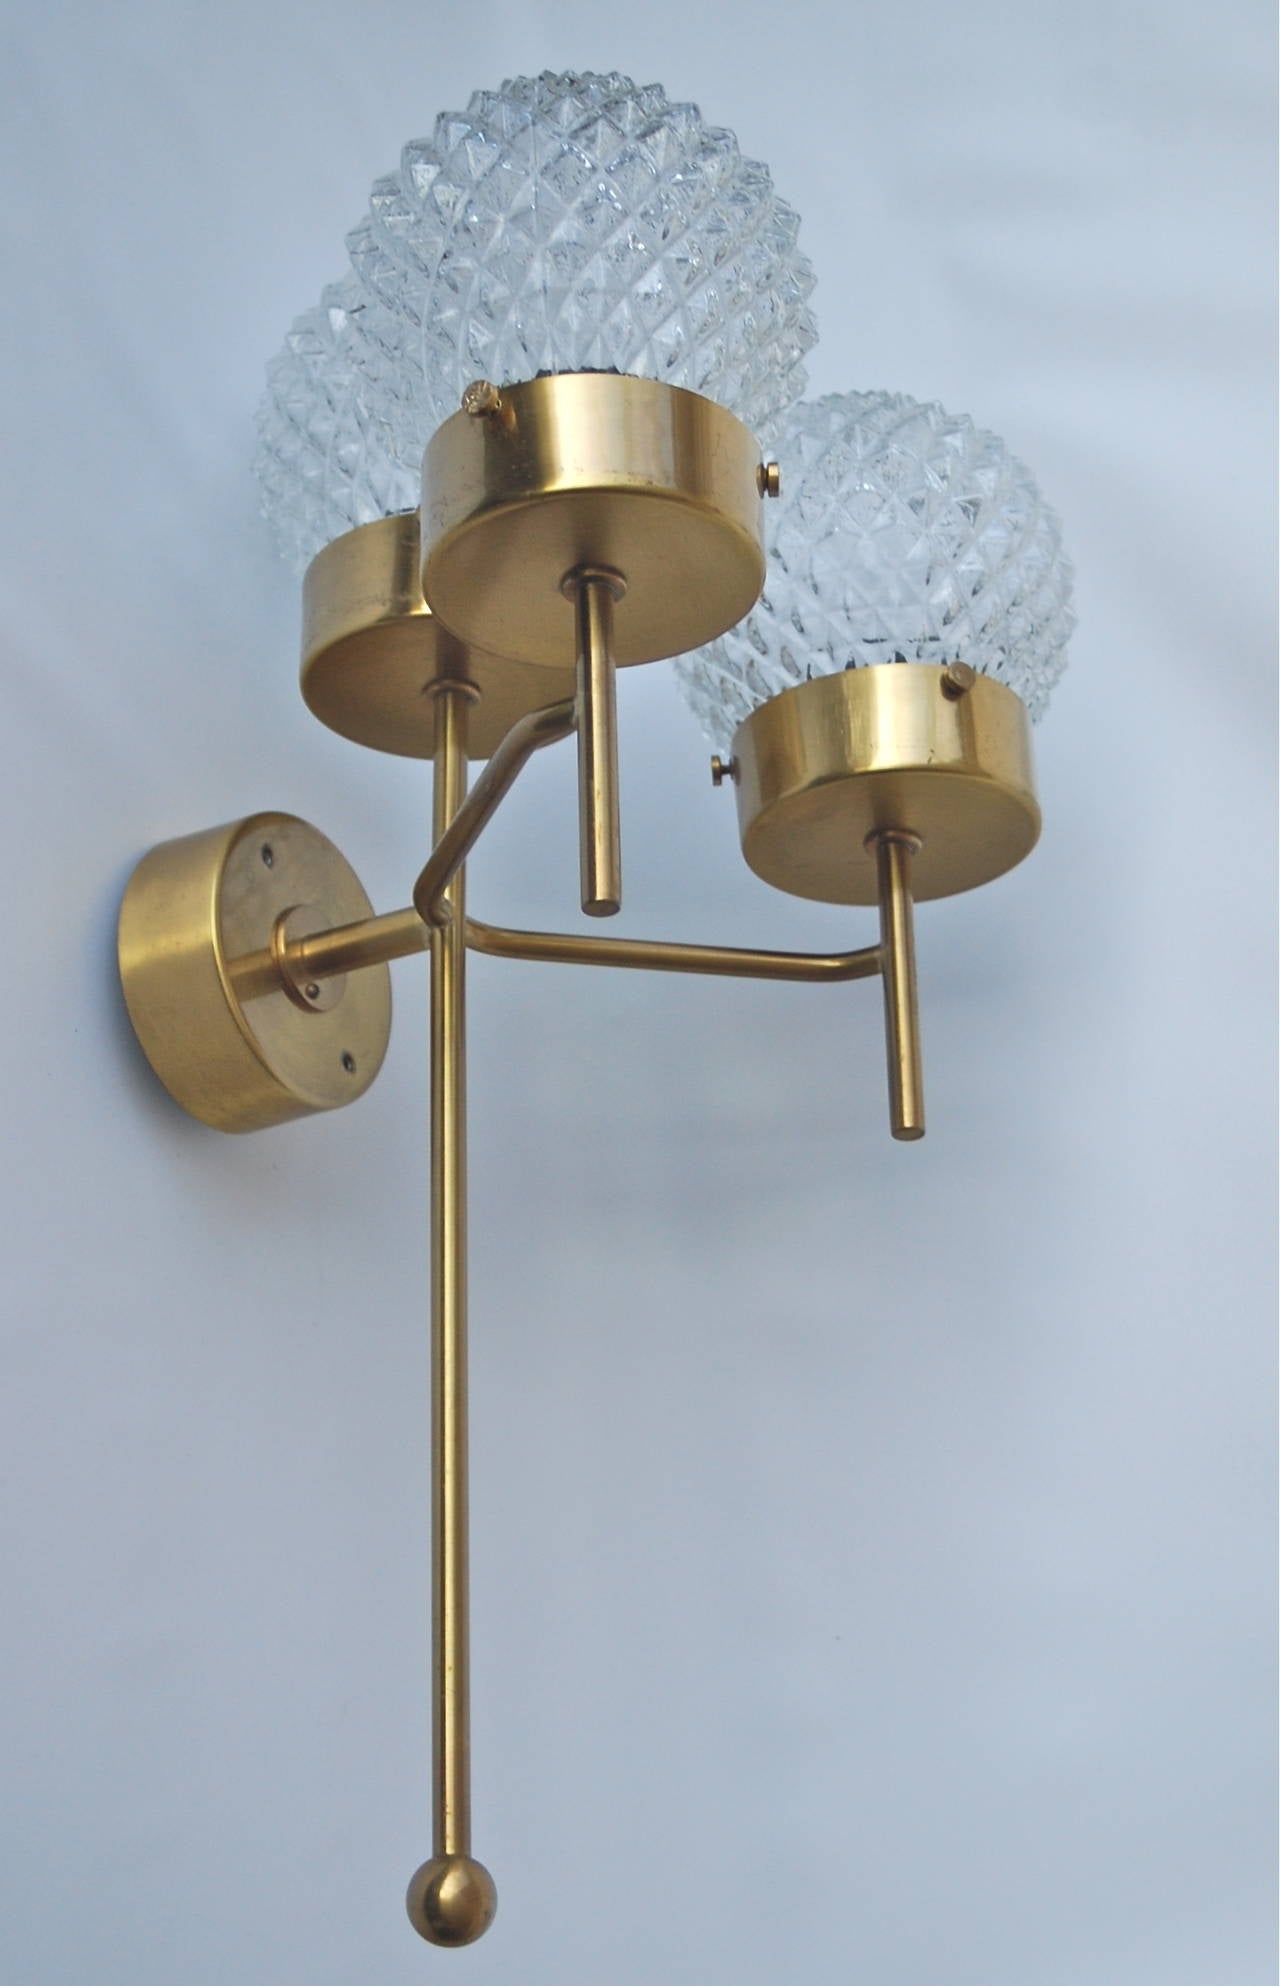 Large and rare pair of wall lights by Hans-Agne Jakobsson for Markaryd, Sweden, circa 1960s.
Brass and textured glass.
Dimensions: 24